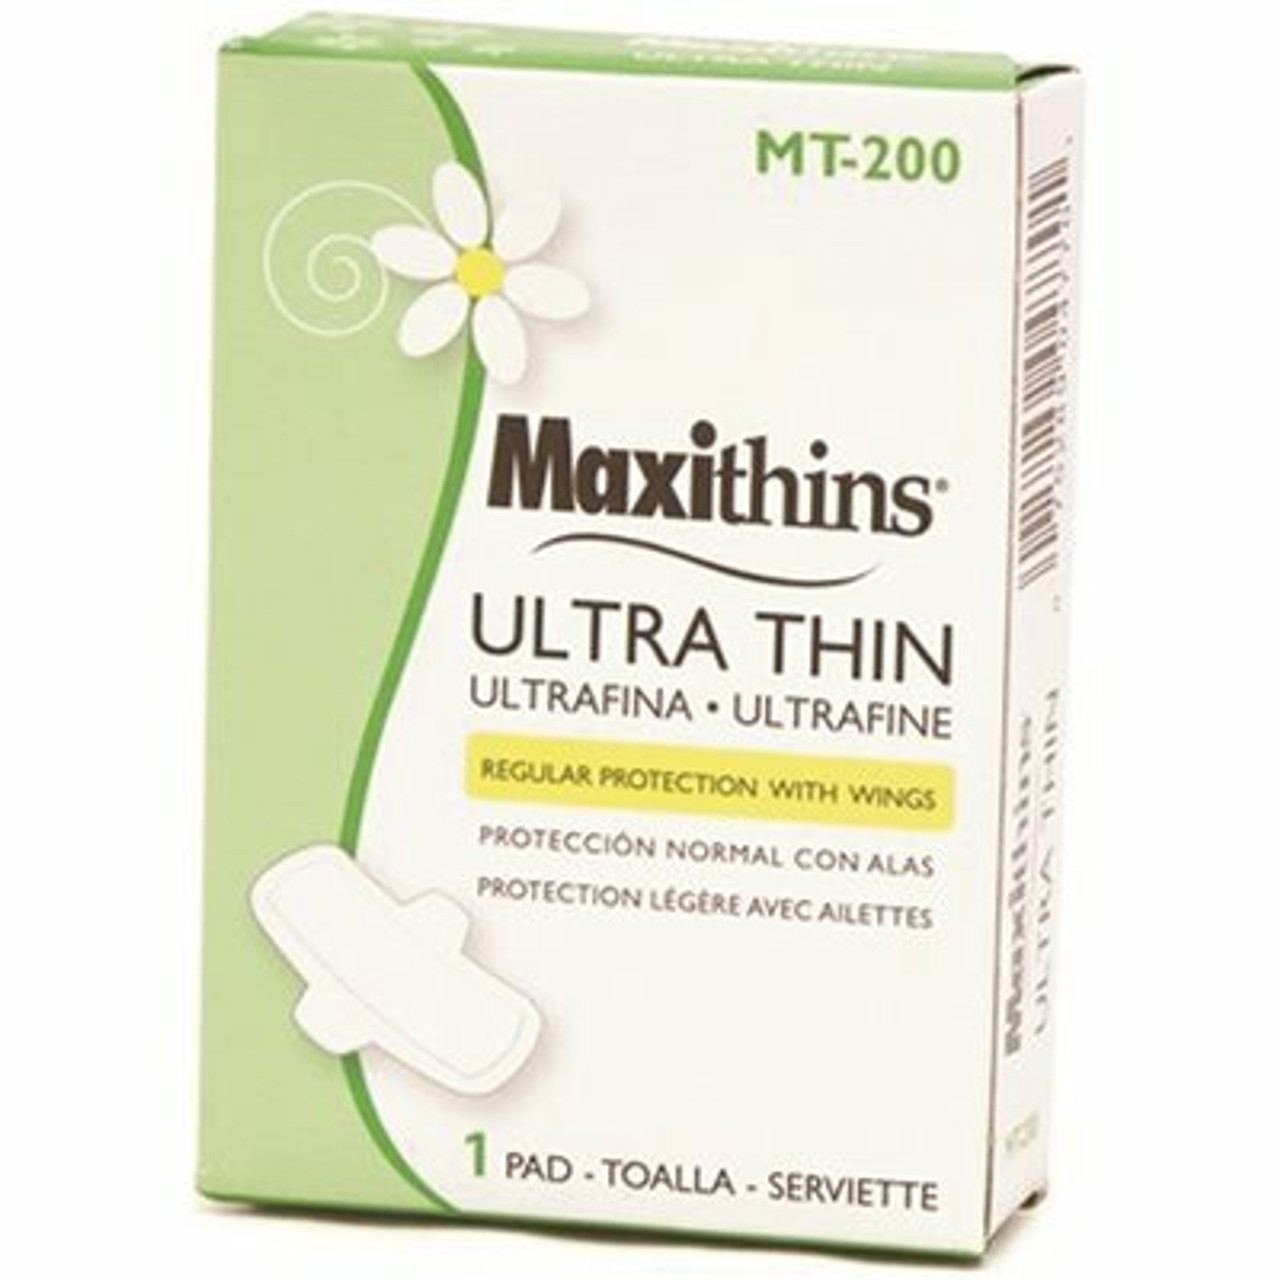 Maxithin Ultra-Thin With Guards, Vending Box (200-Case)